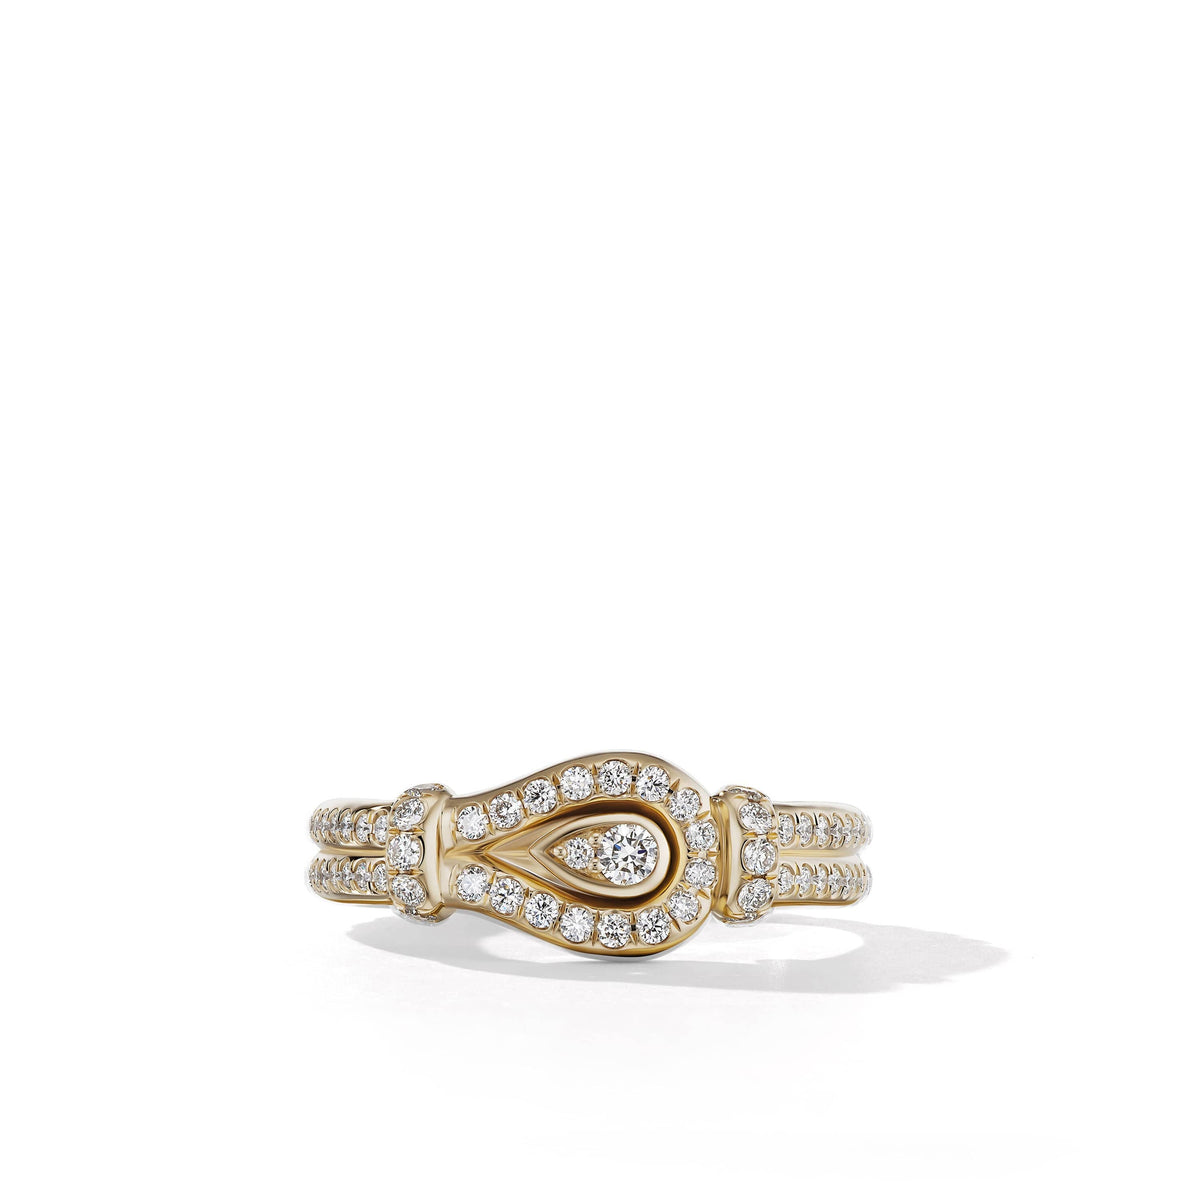 Thoroughbred Loop Ring in 18K Yellow Gold with Full Pavé Diamonds